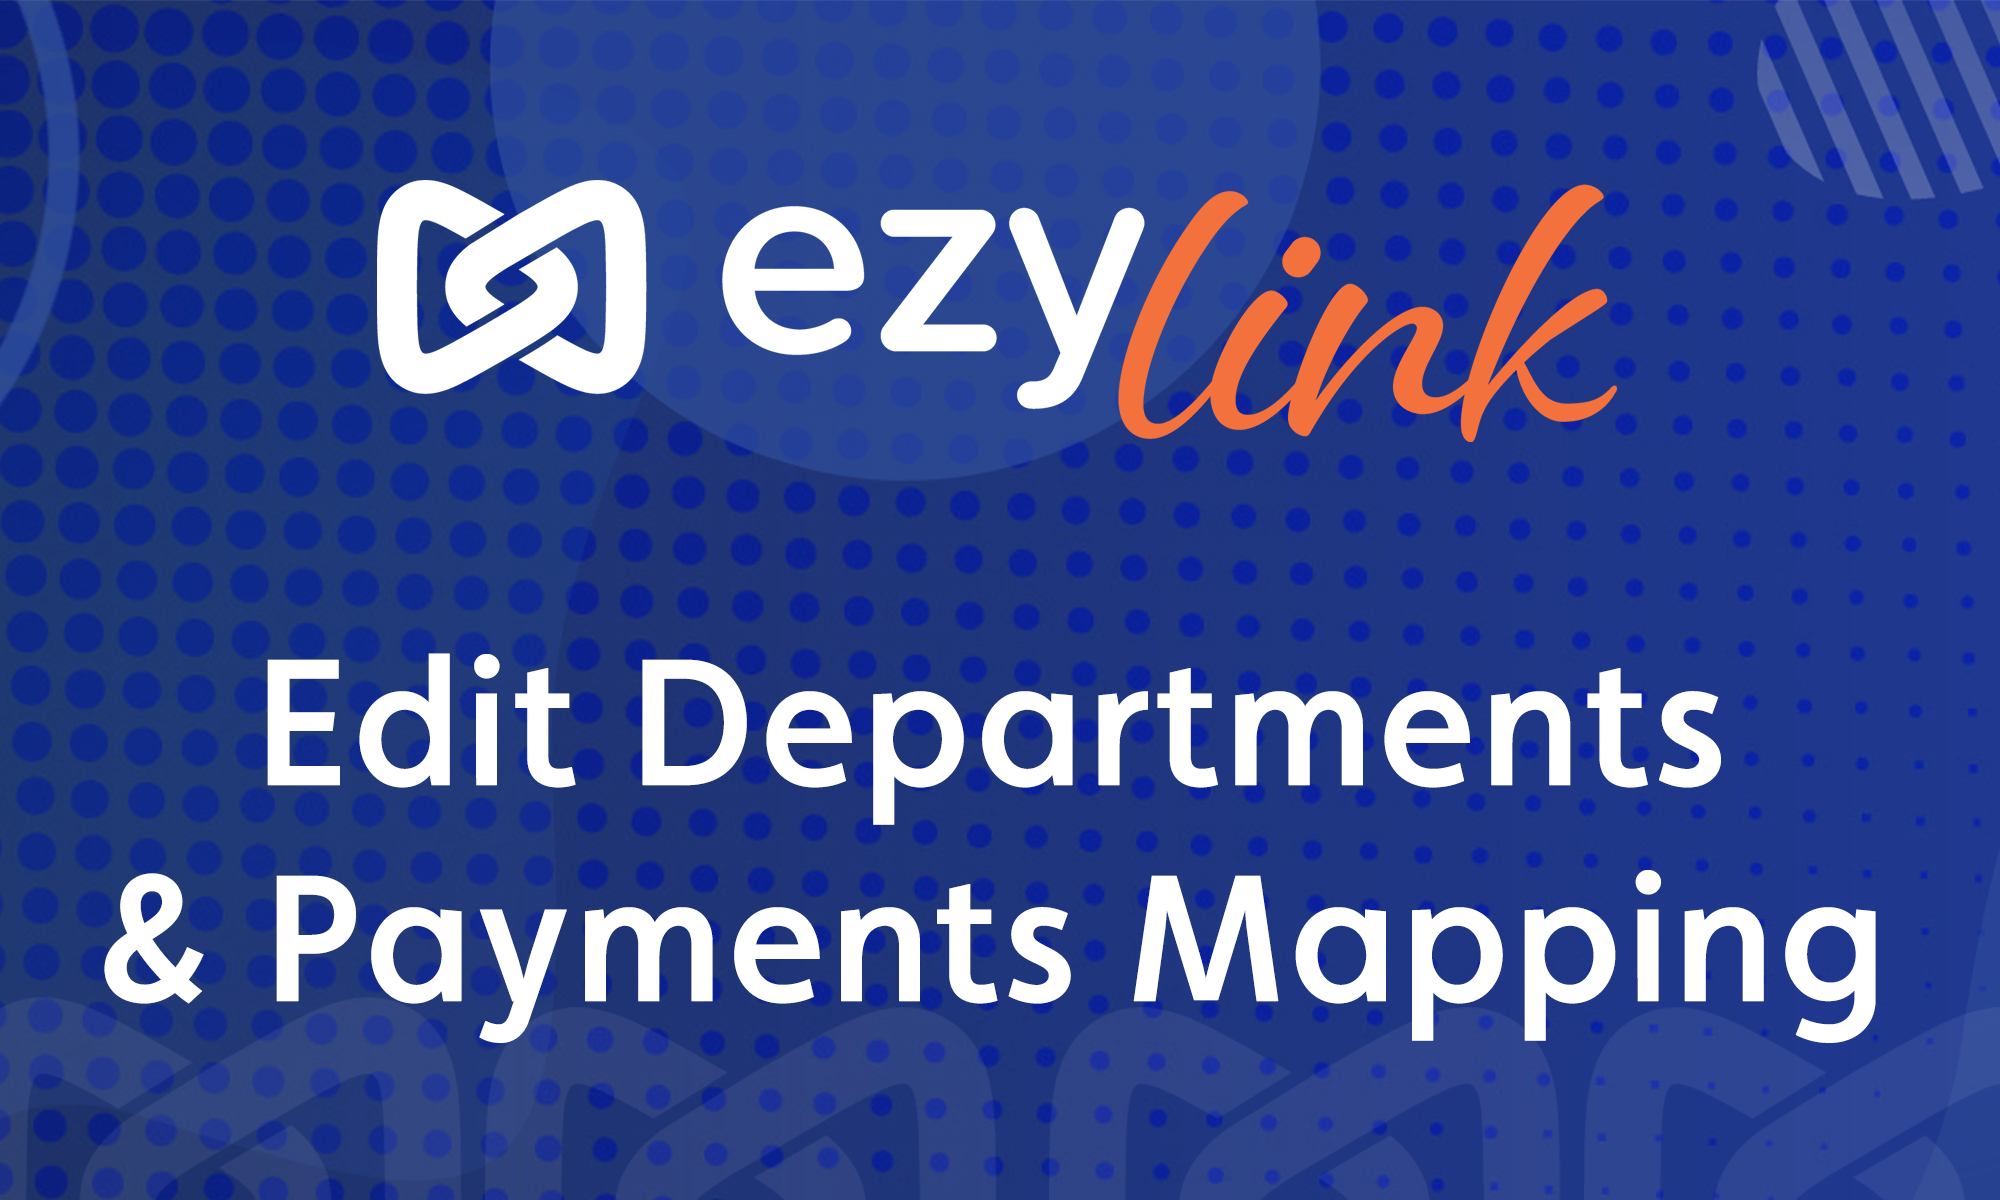 Featured image for “Ezylink Cloud – Editing Departments/Payments Mapping”